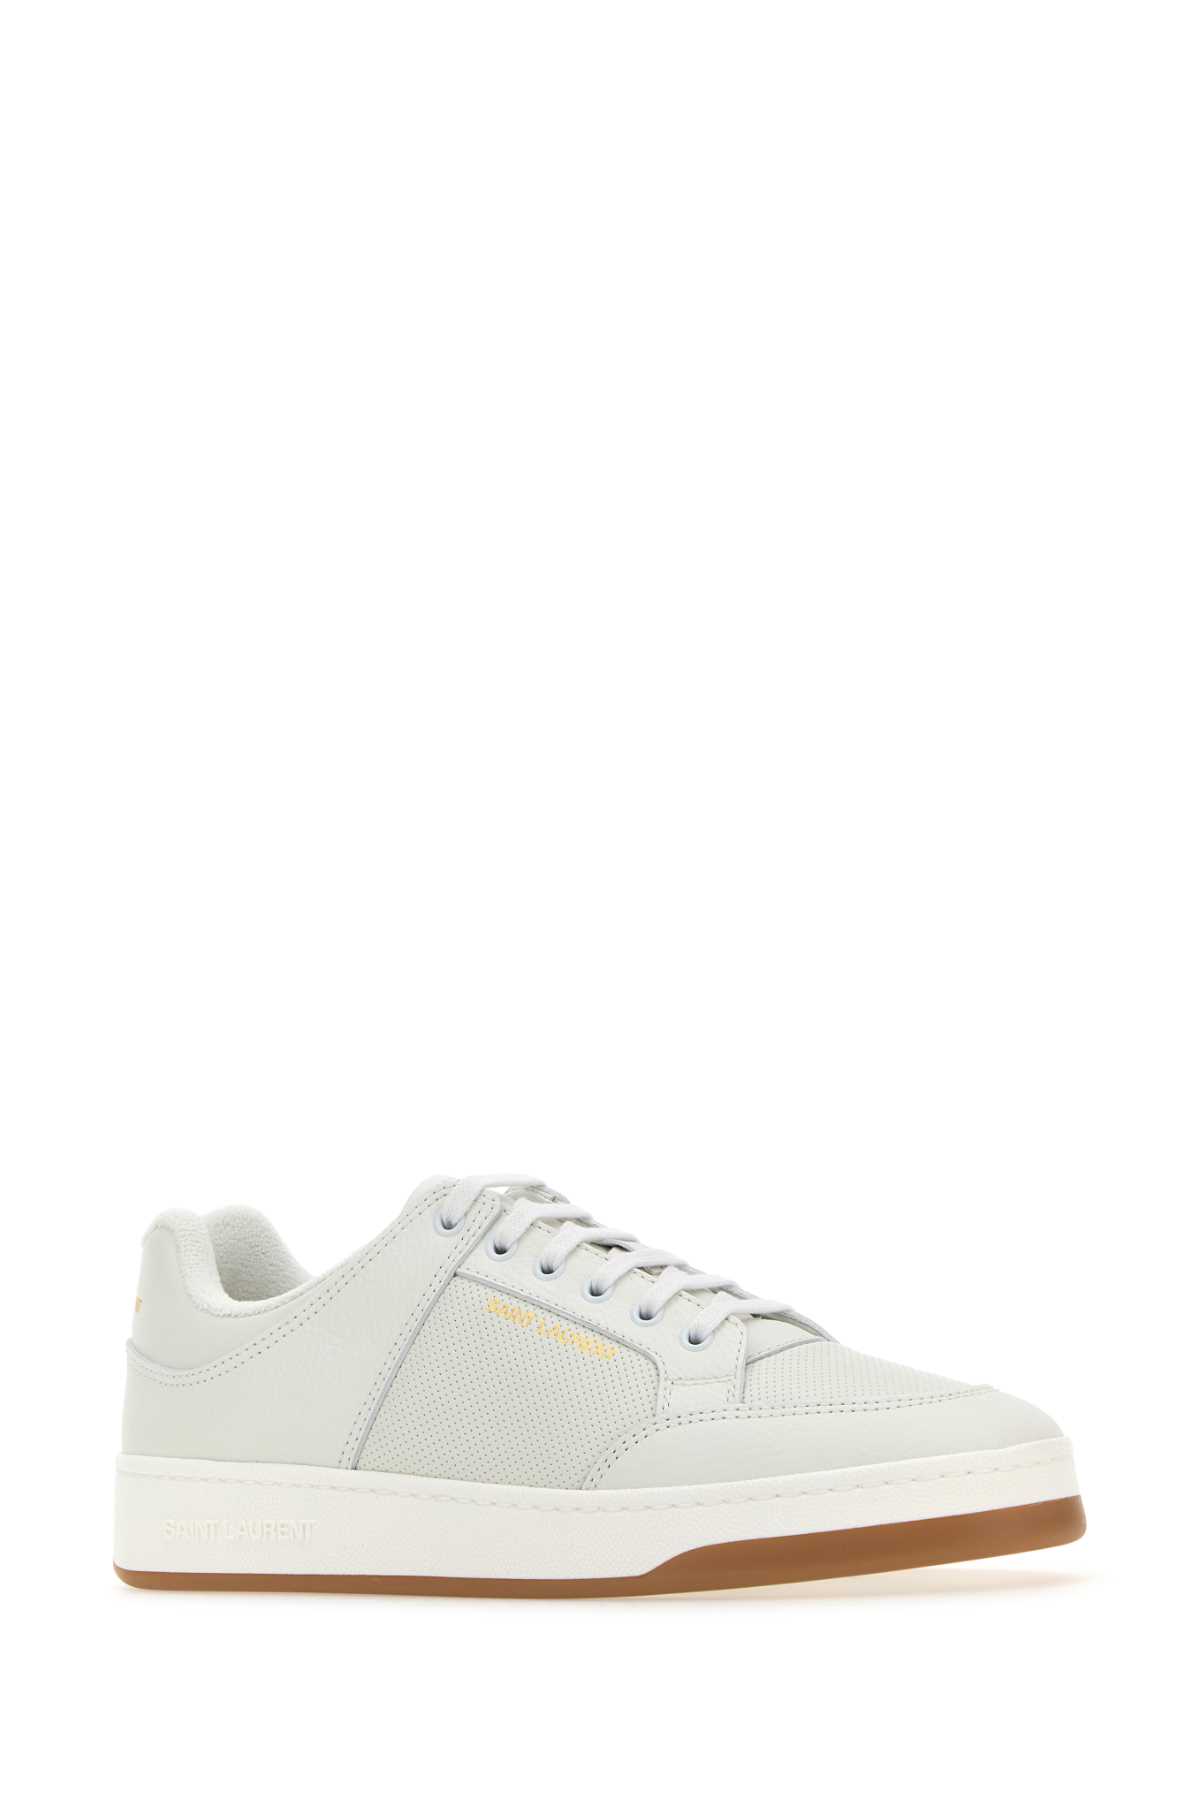 Saint Laurent White Leather Sl/16 Sneakers In Blancoptblancopt